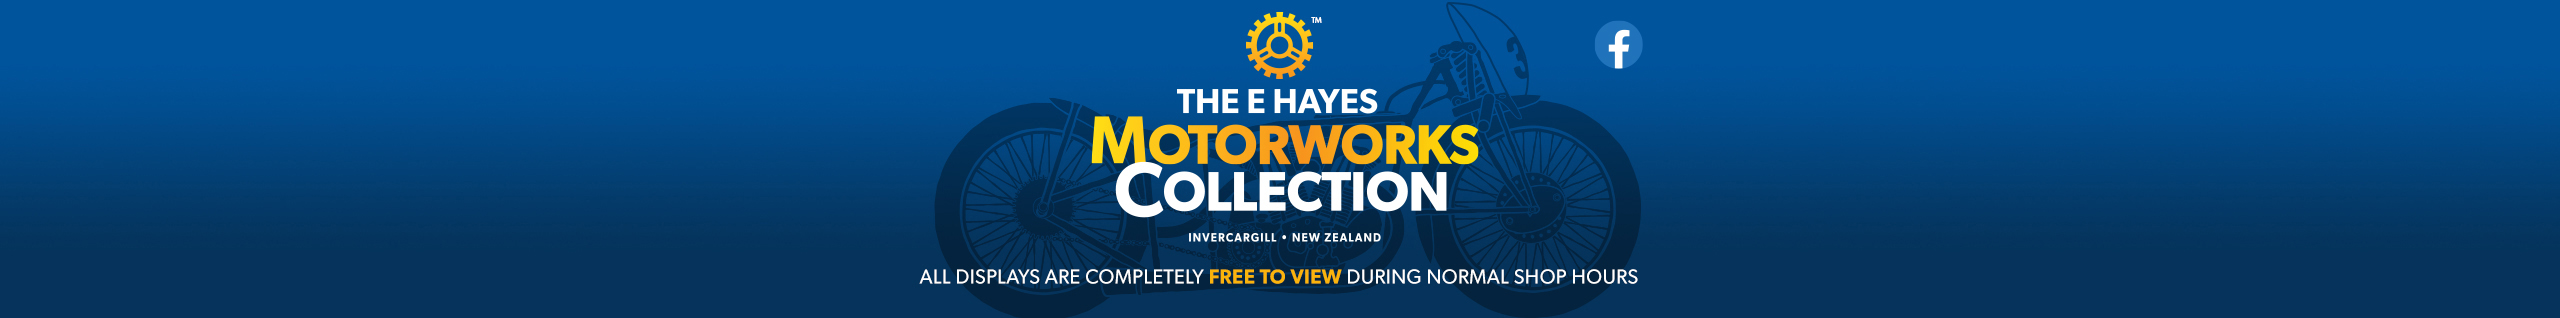 Visit the E Hayes Motorworks Collection - FREE TO VIEW during normal shop hours 